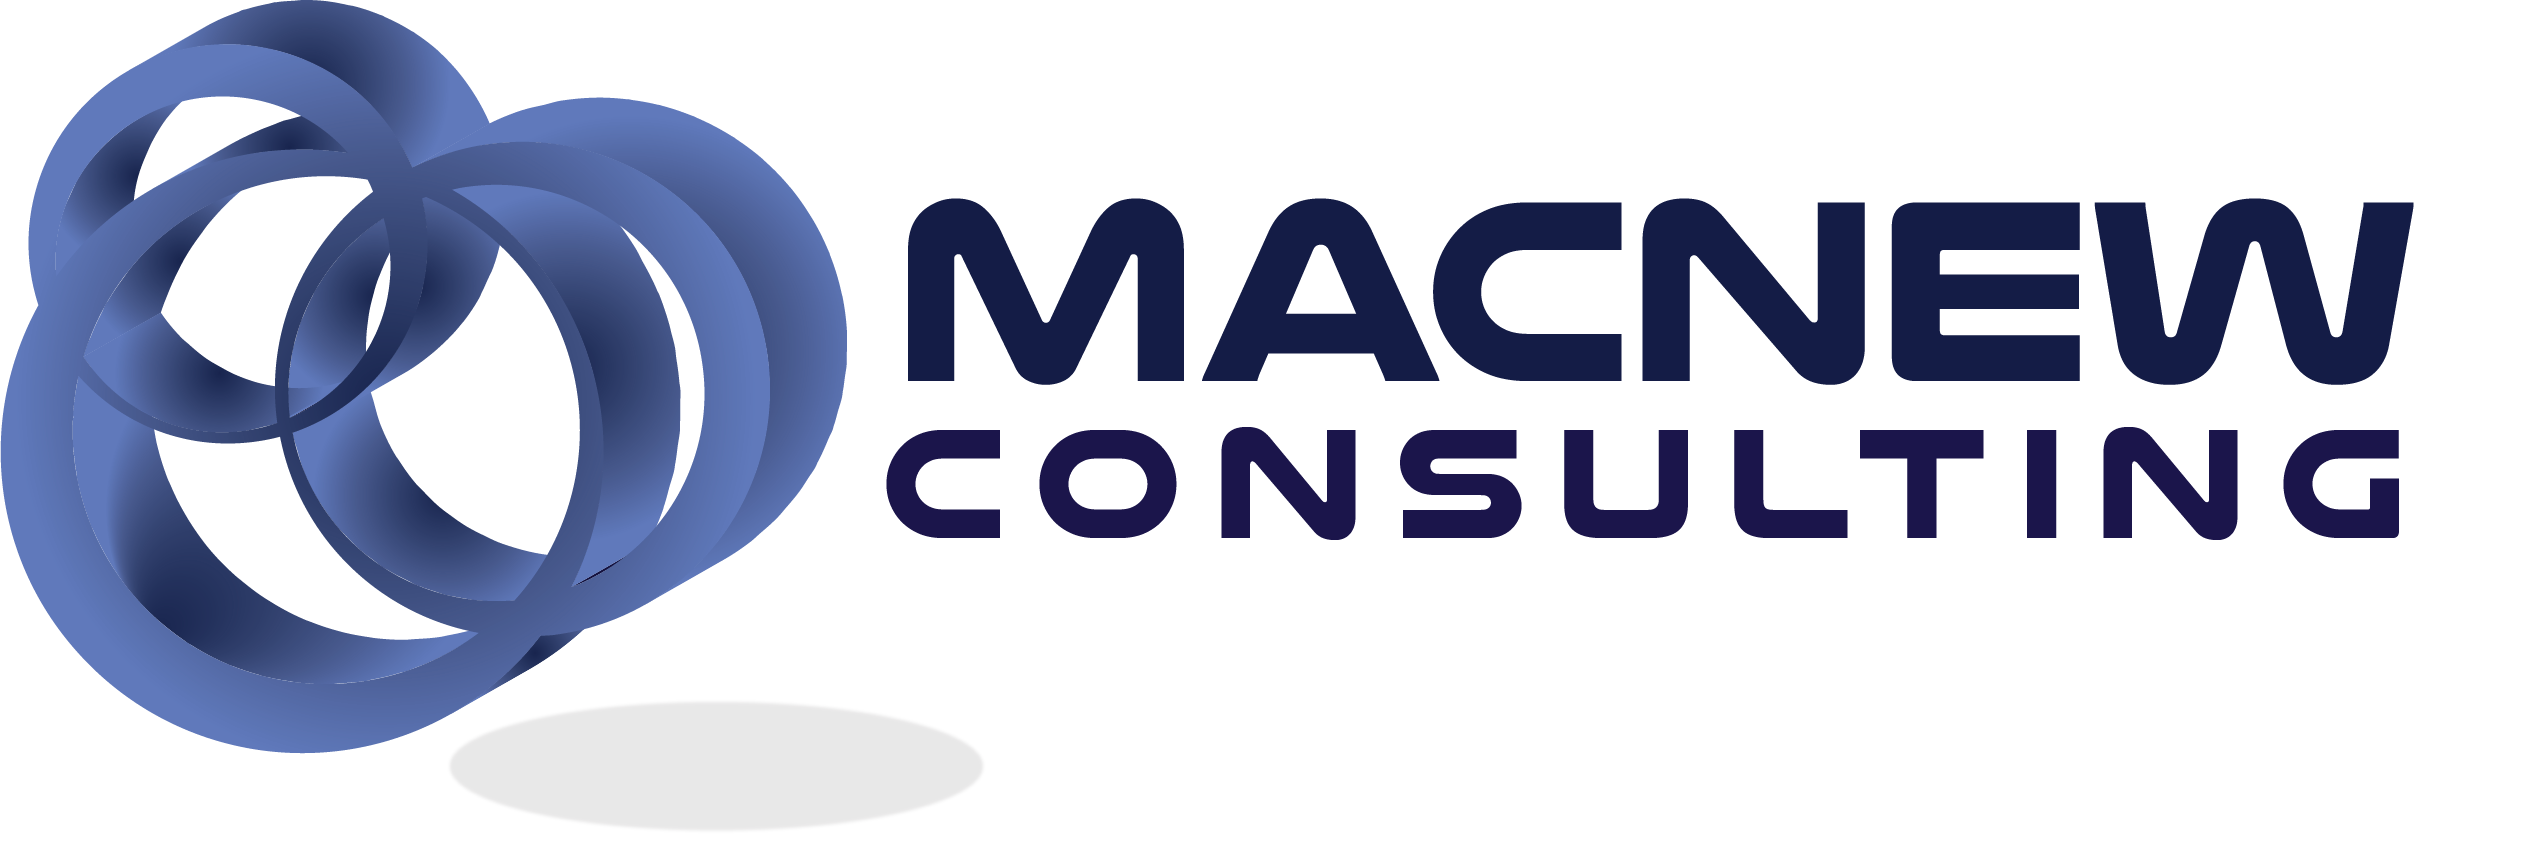 Macnew Consulting